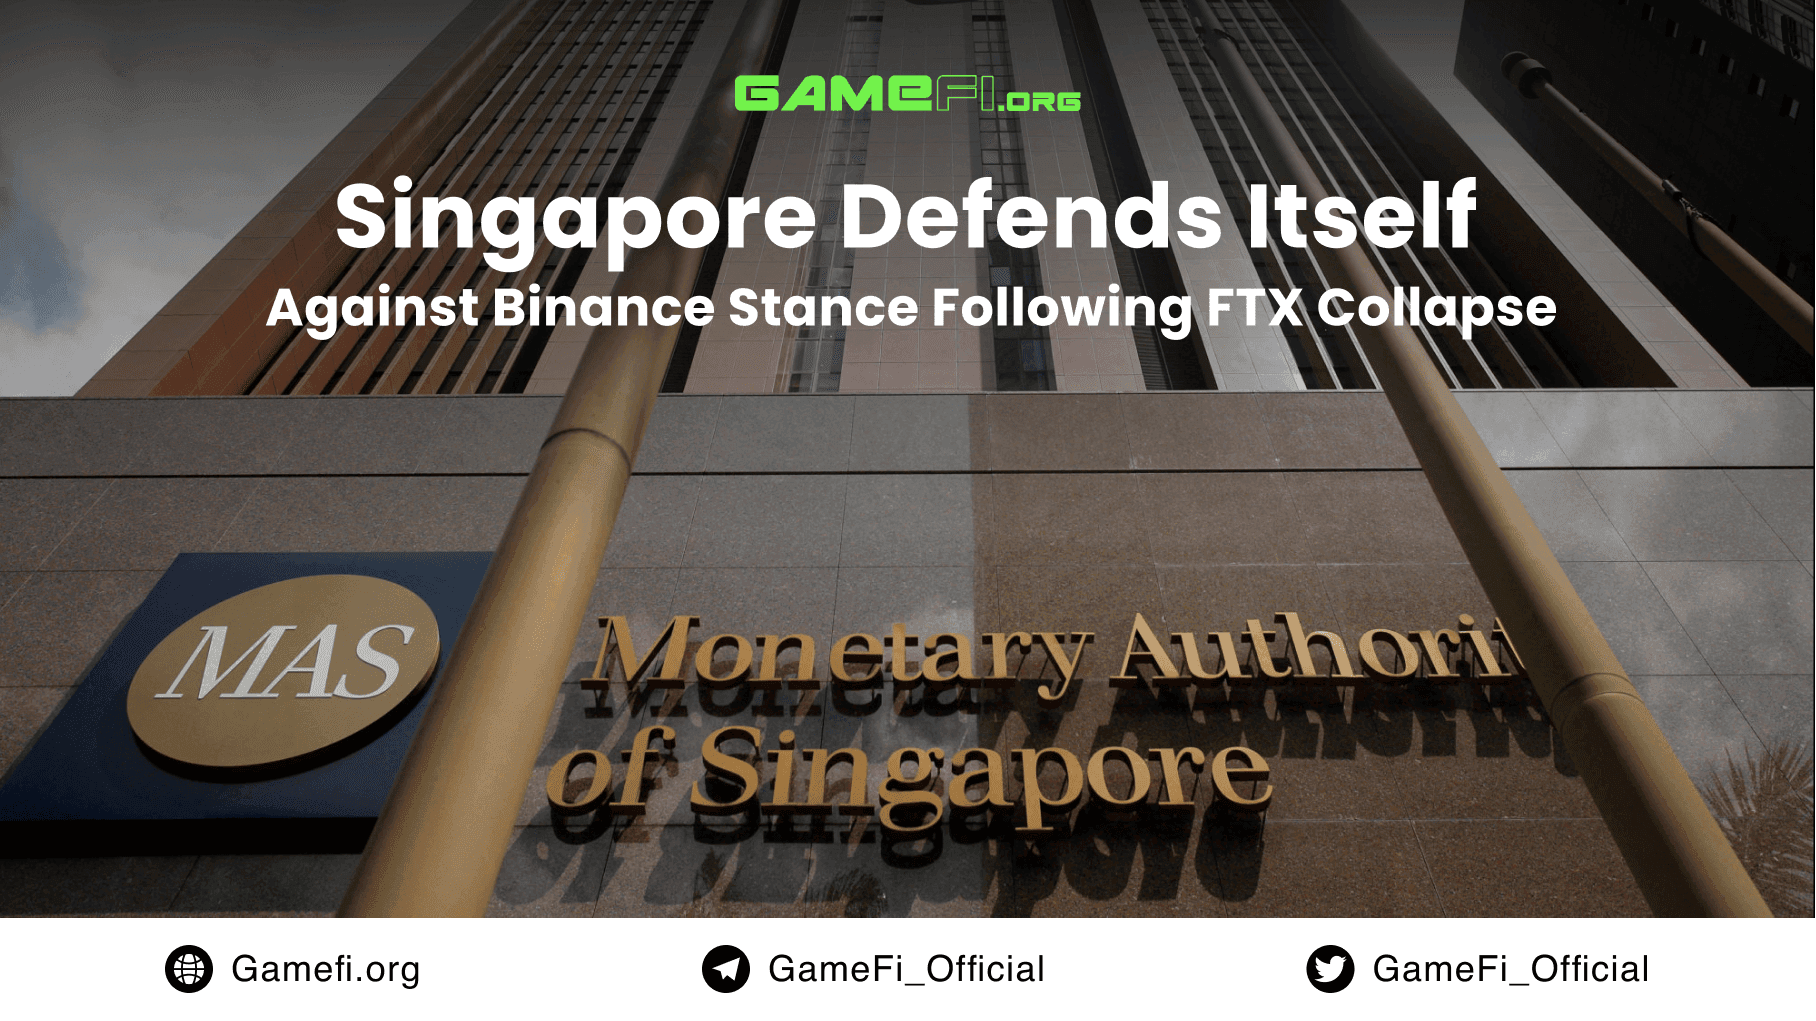 Singapore Defends Itself Against Binance Stance Following FTX Collapse